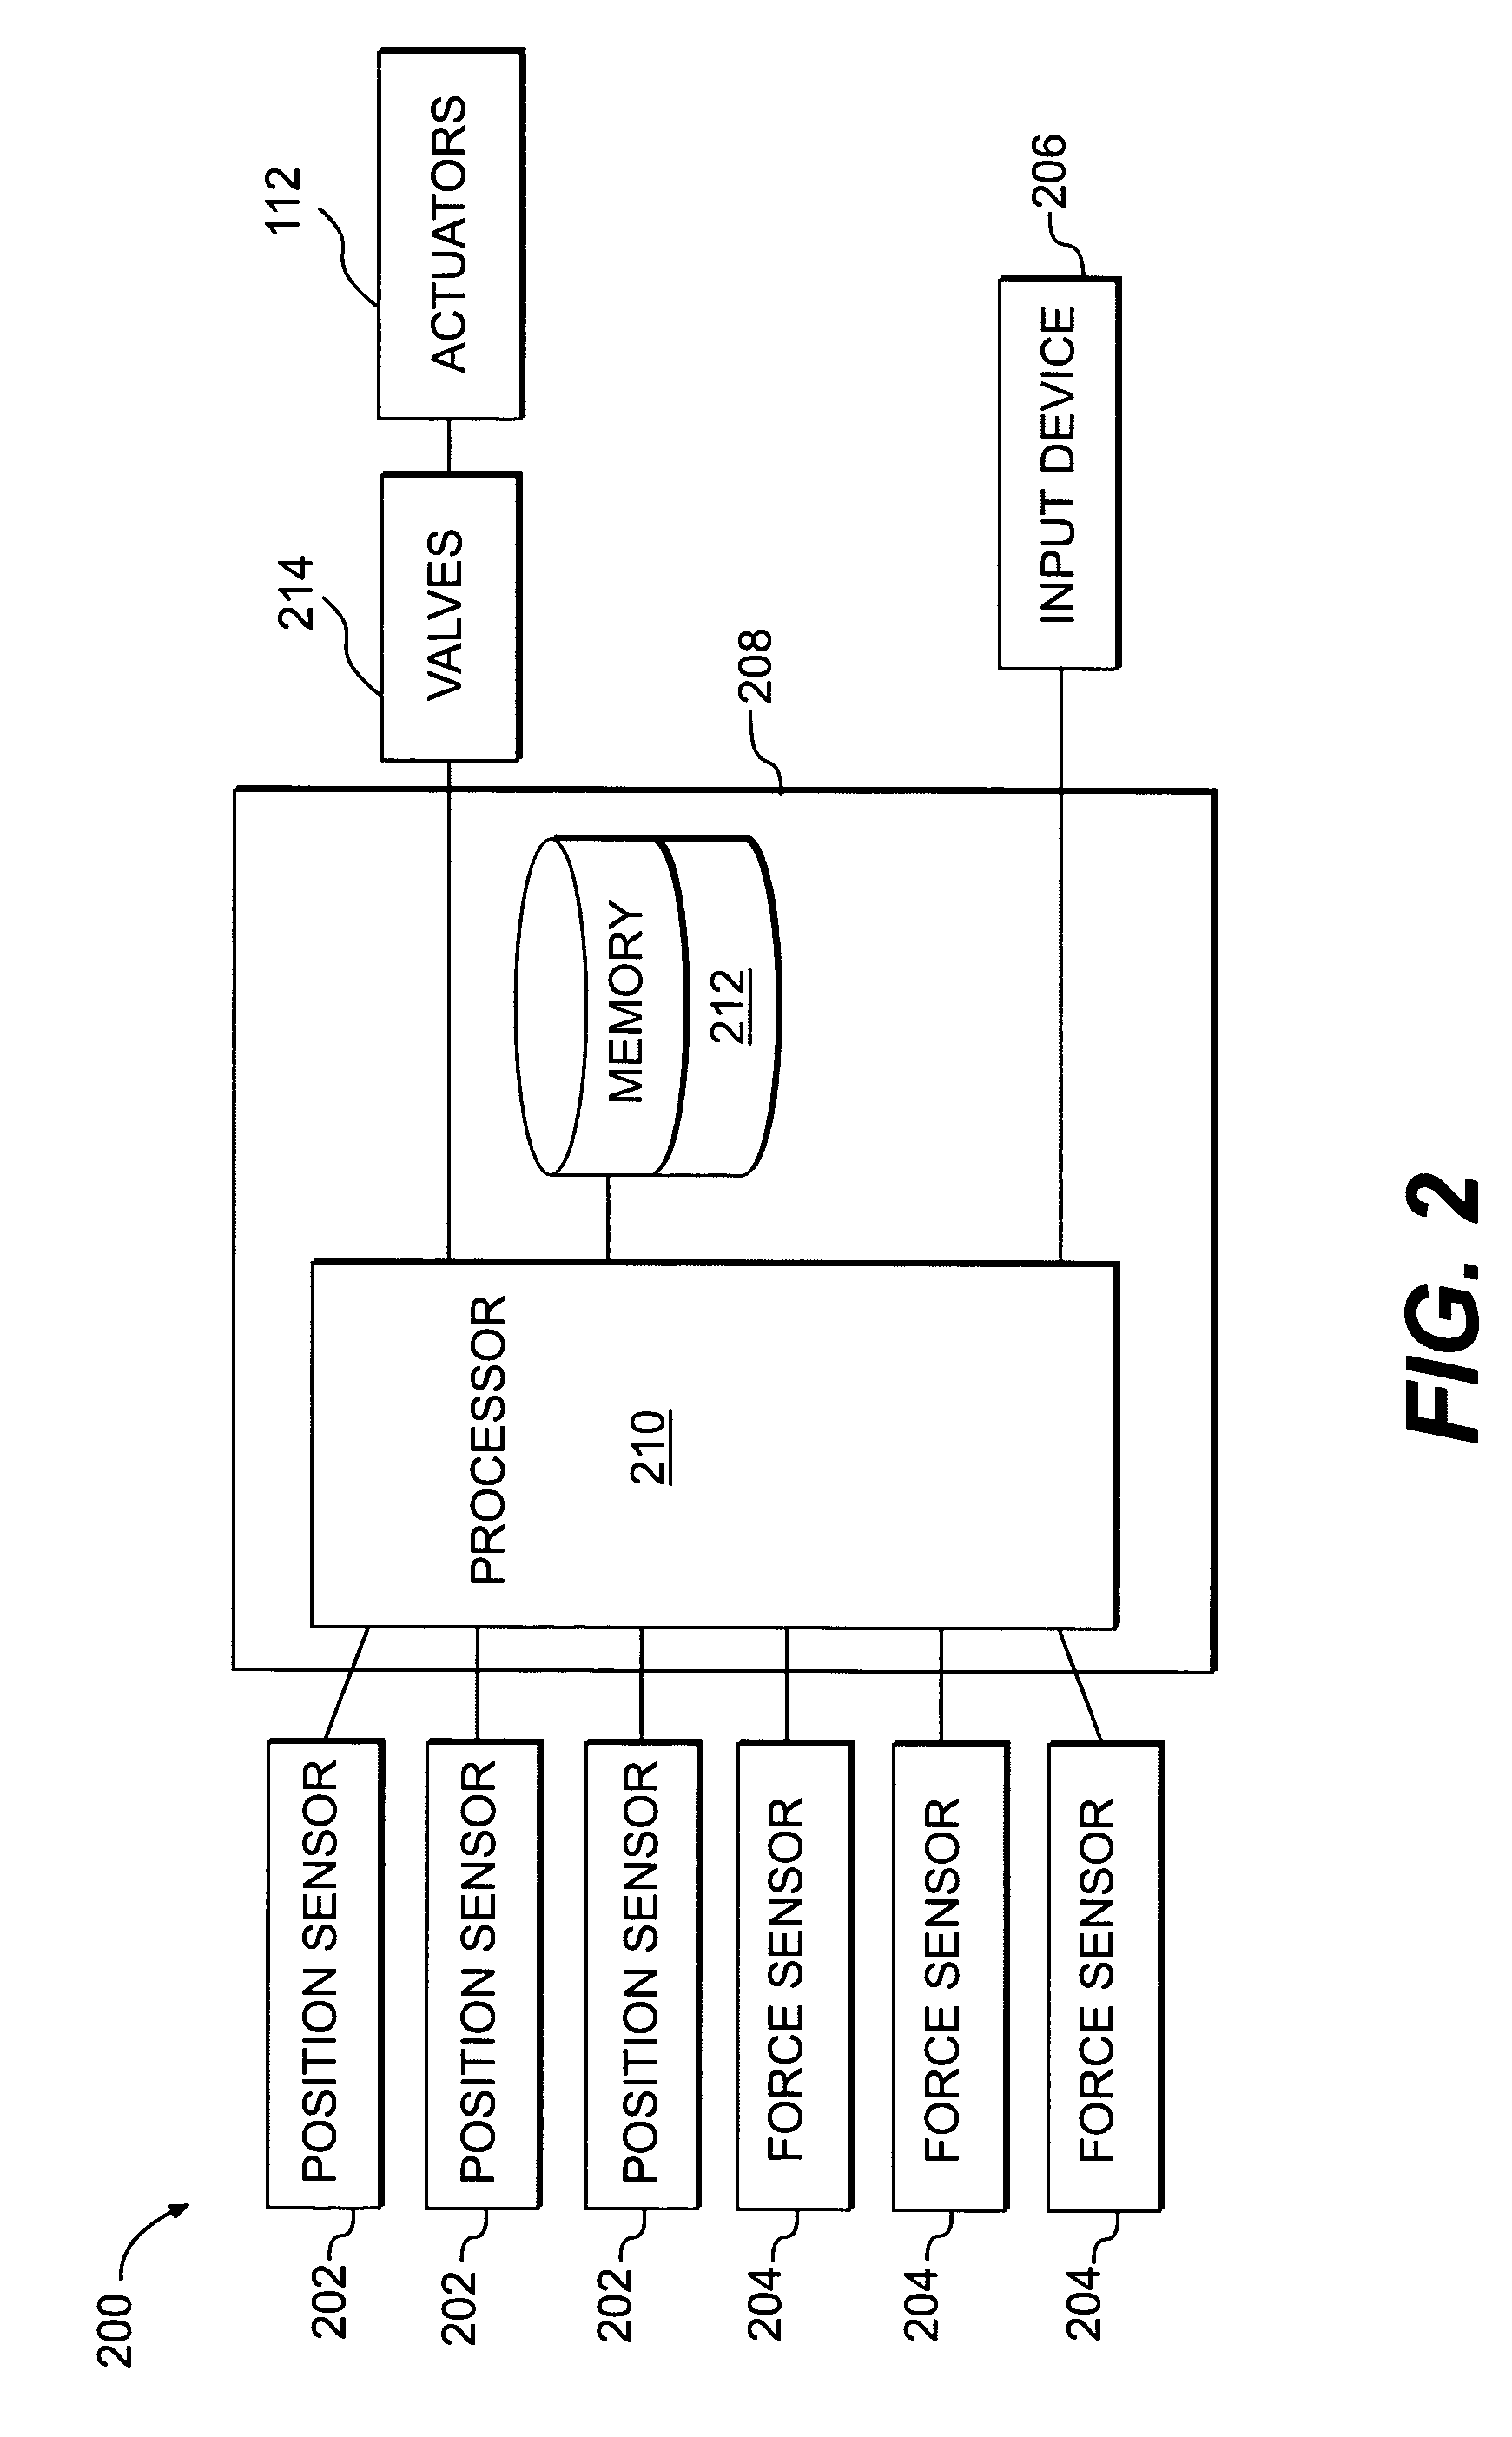 Method and system of controlling a work tool